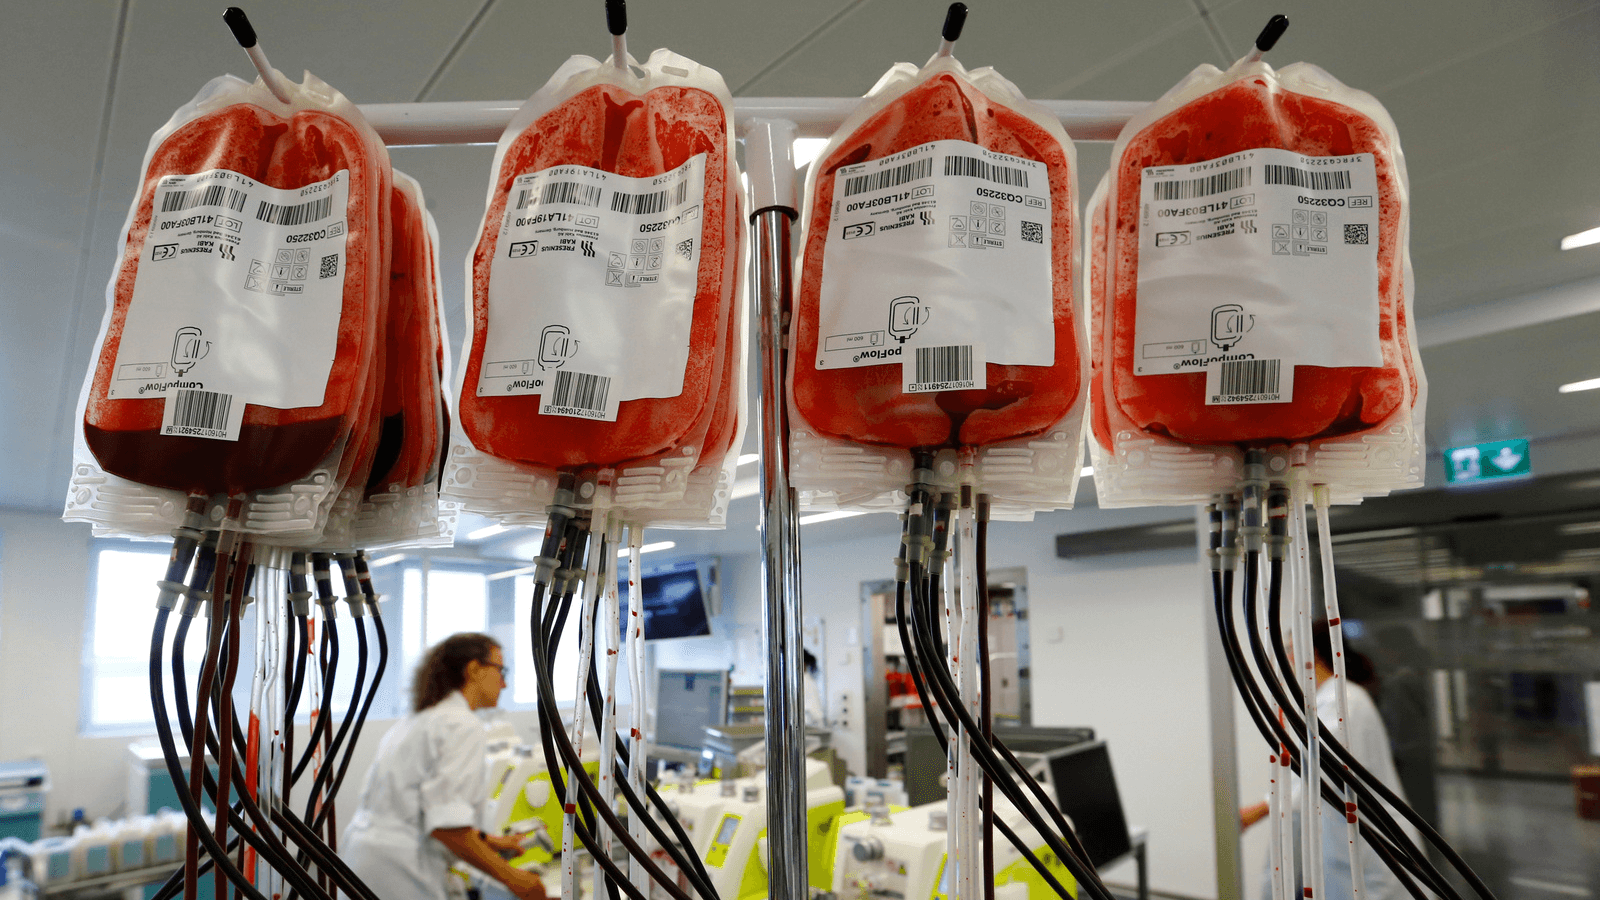 An empoyee checks the separation process of blood donations at the Interregional Transfusion CRS in Bern, Switzerland, June 15, 2017. Blood shortages occur often in the US.